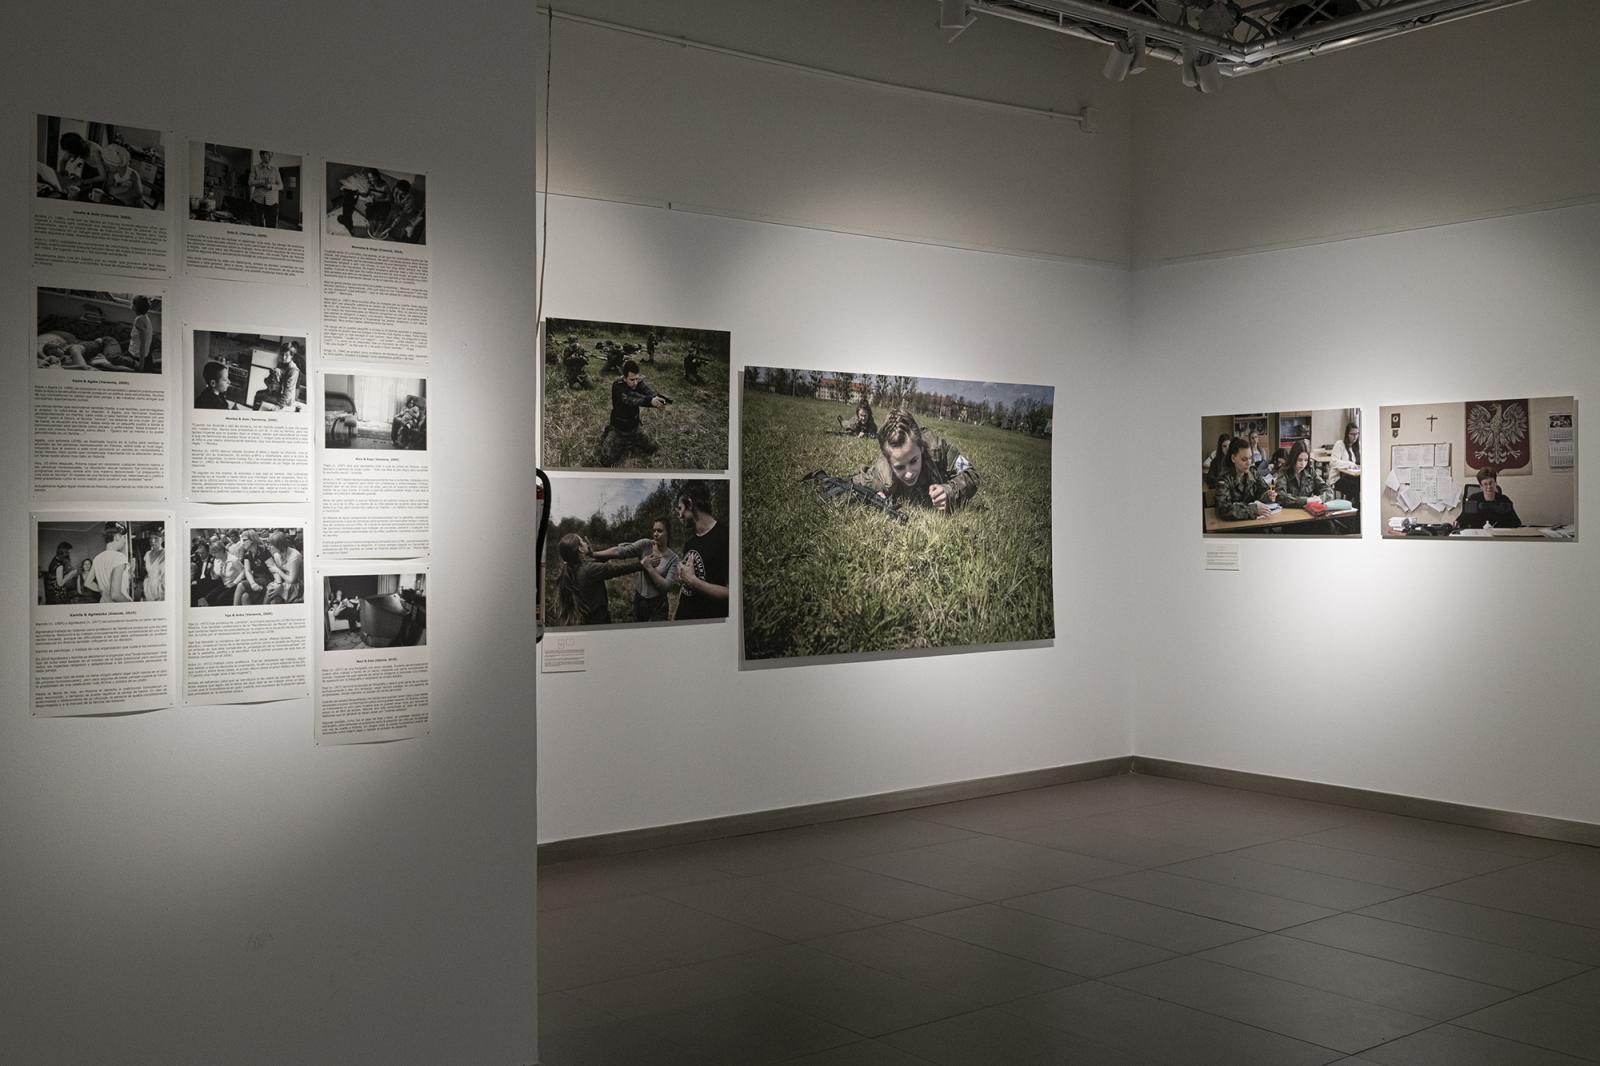 Solo exhibition at the Sala EFTI, International Center of Photography and Cinema